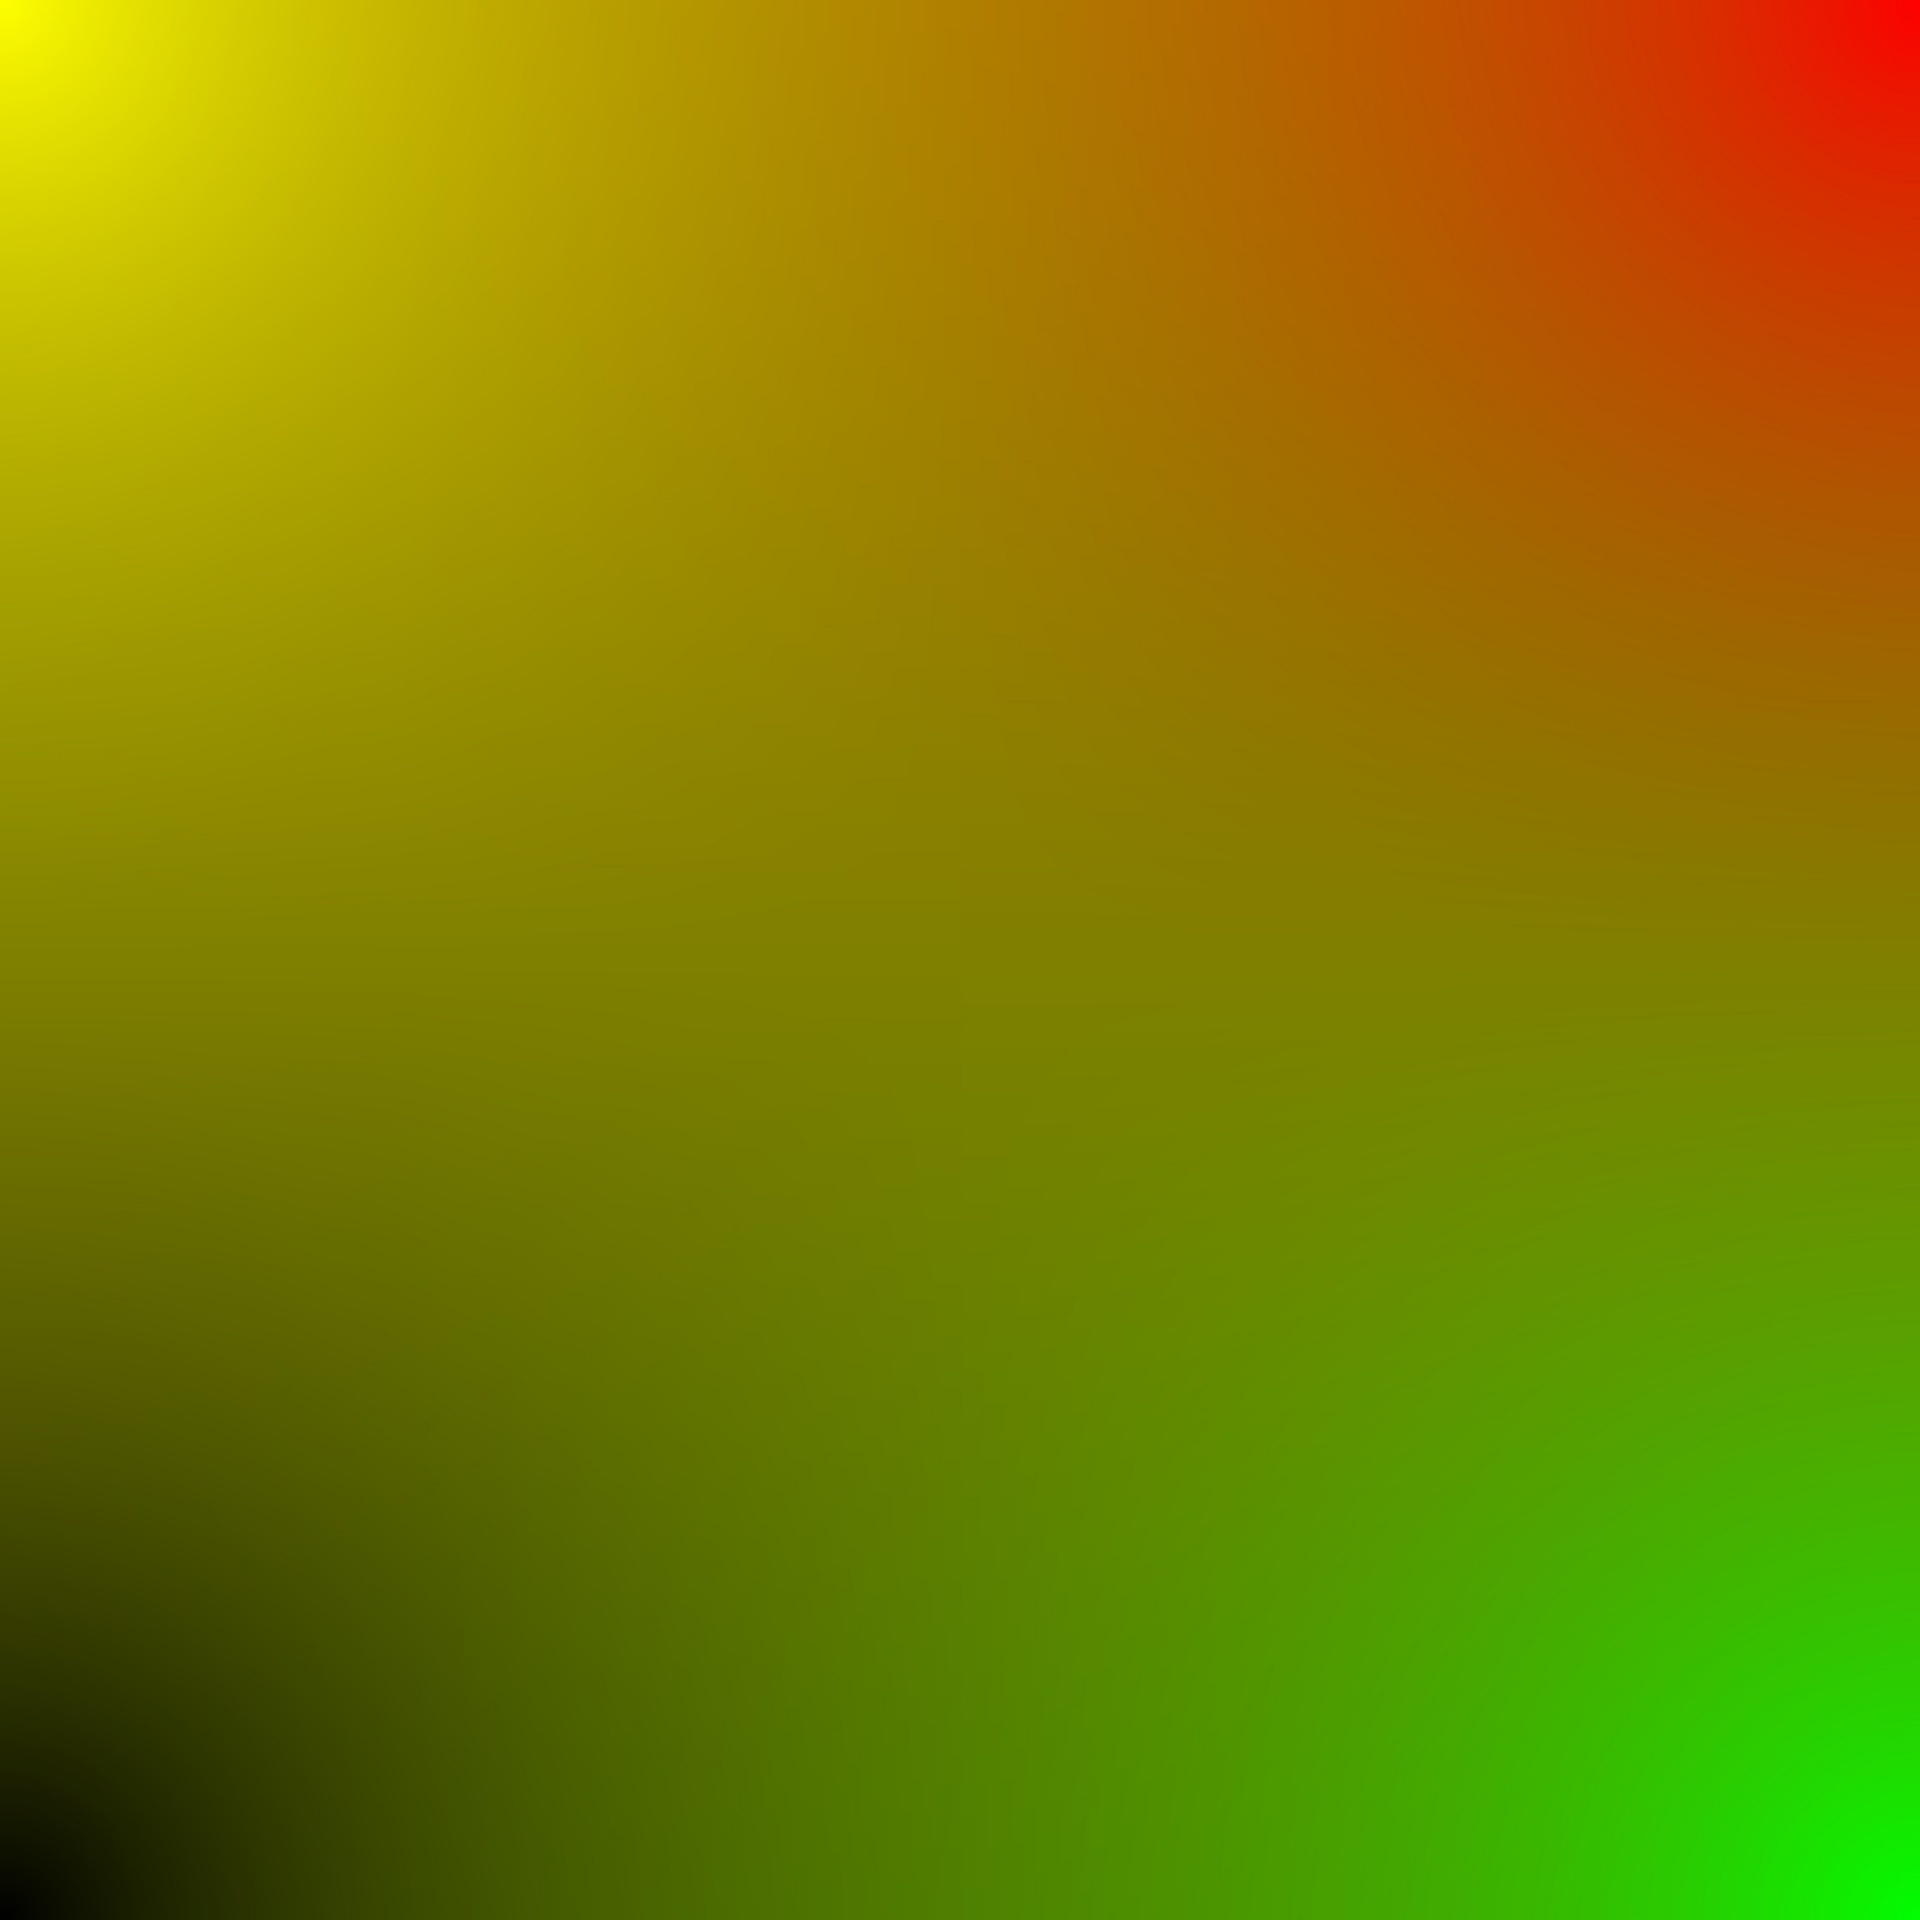 Download free photo of Gradient,yellow,green,red,black - from 